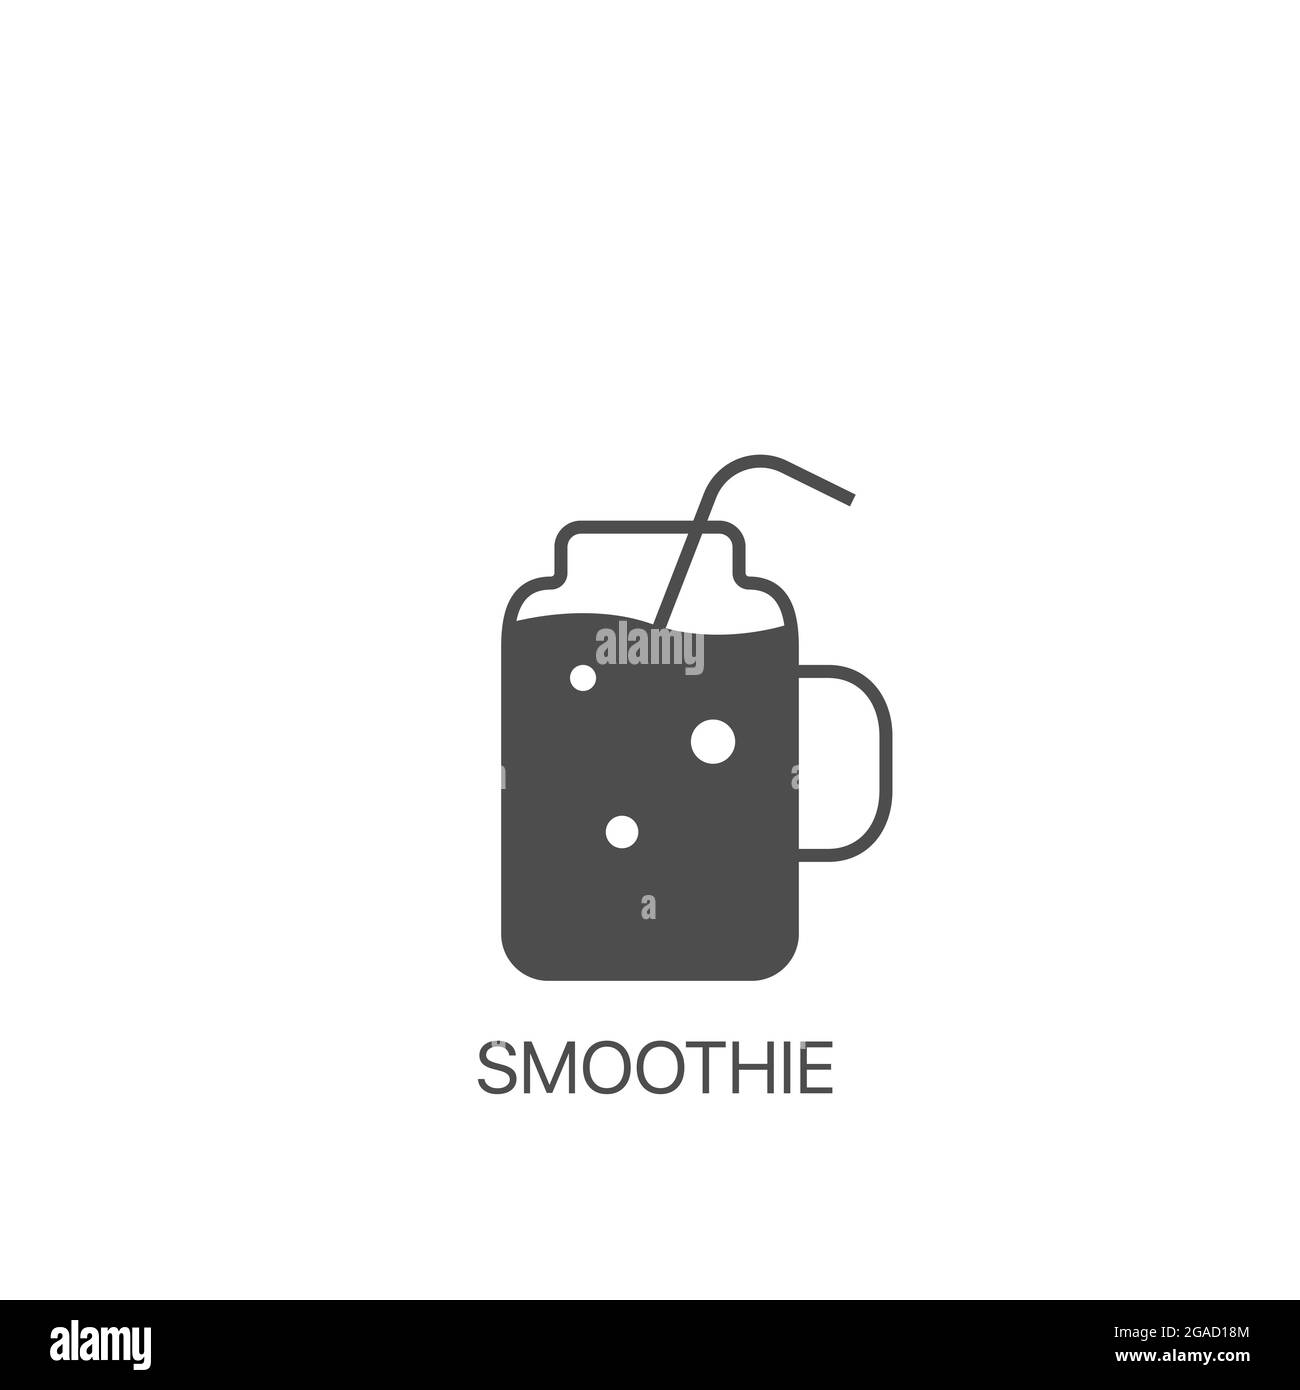 Smoothie line icon. Symbol of detox diet and healthy lifestyle Stock Vector